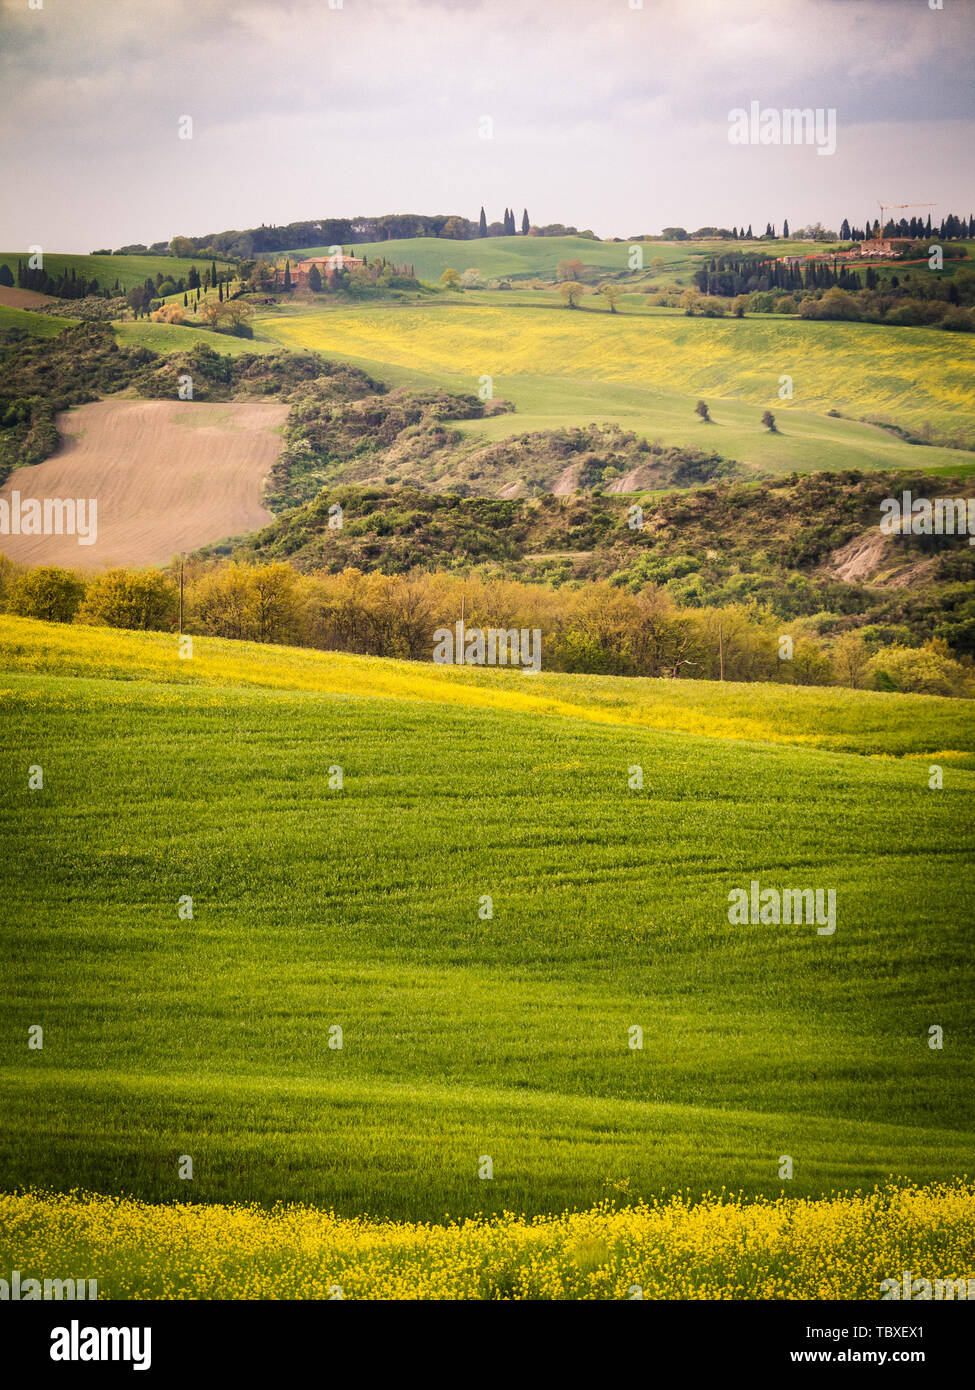 Landscape in spring. Sinuous green hills with yellow flowers. Stock Photo